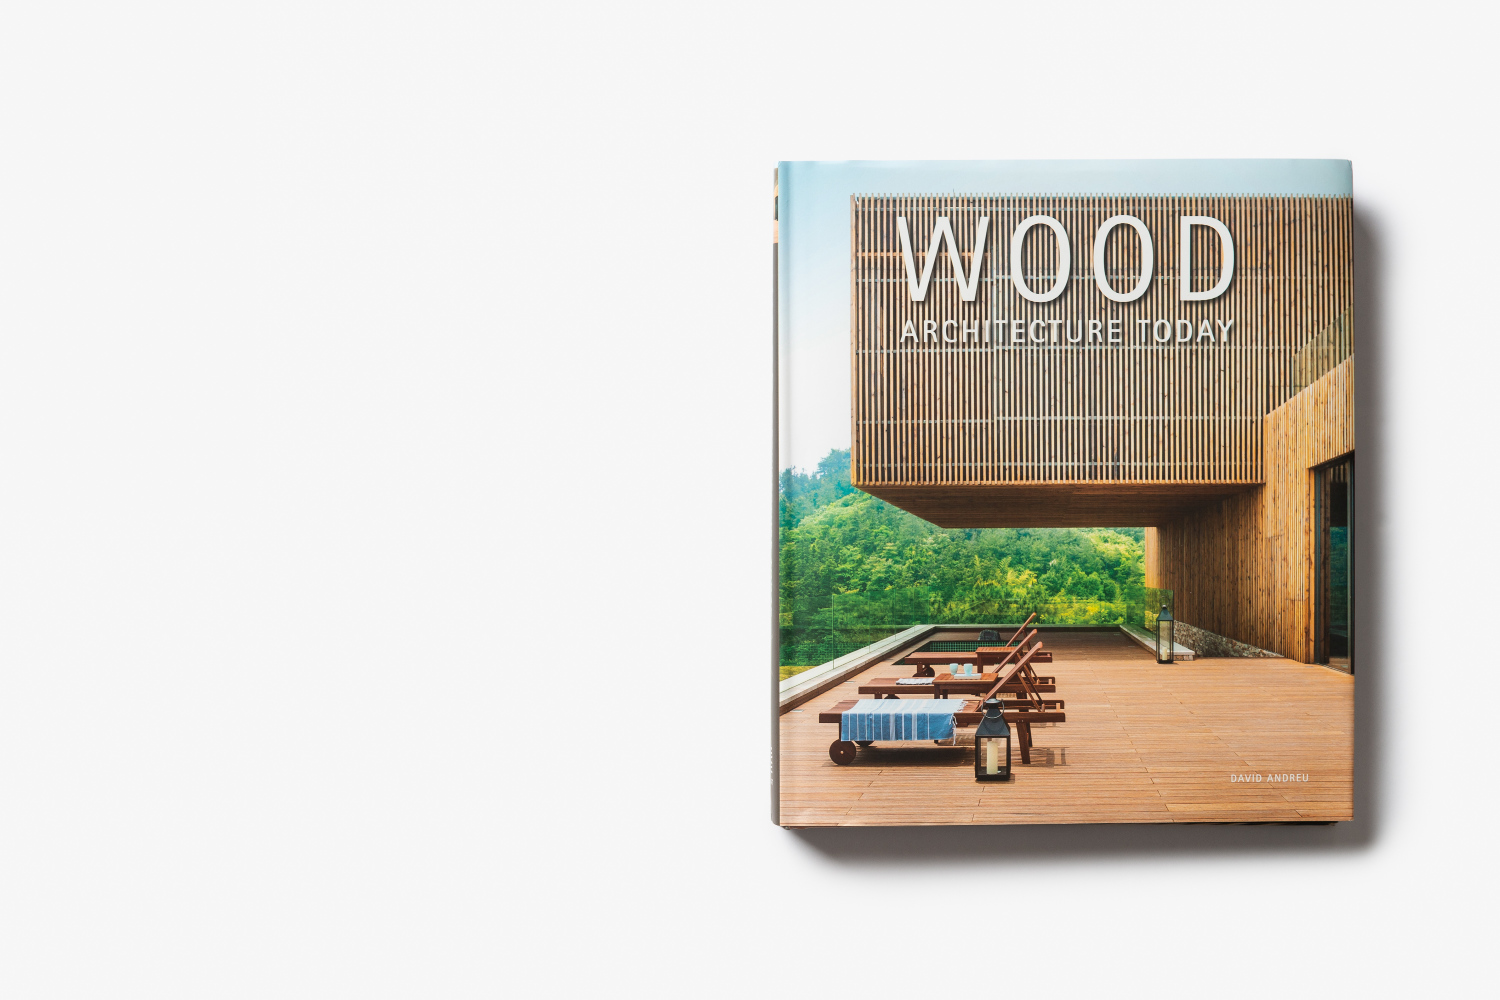 Birdseye Featured in “Wood – Architecture Today”